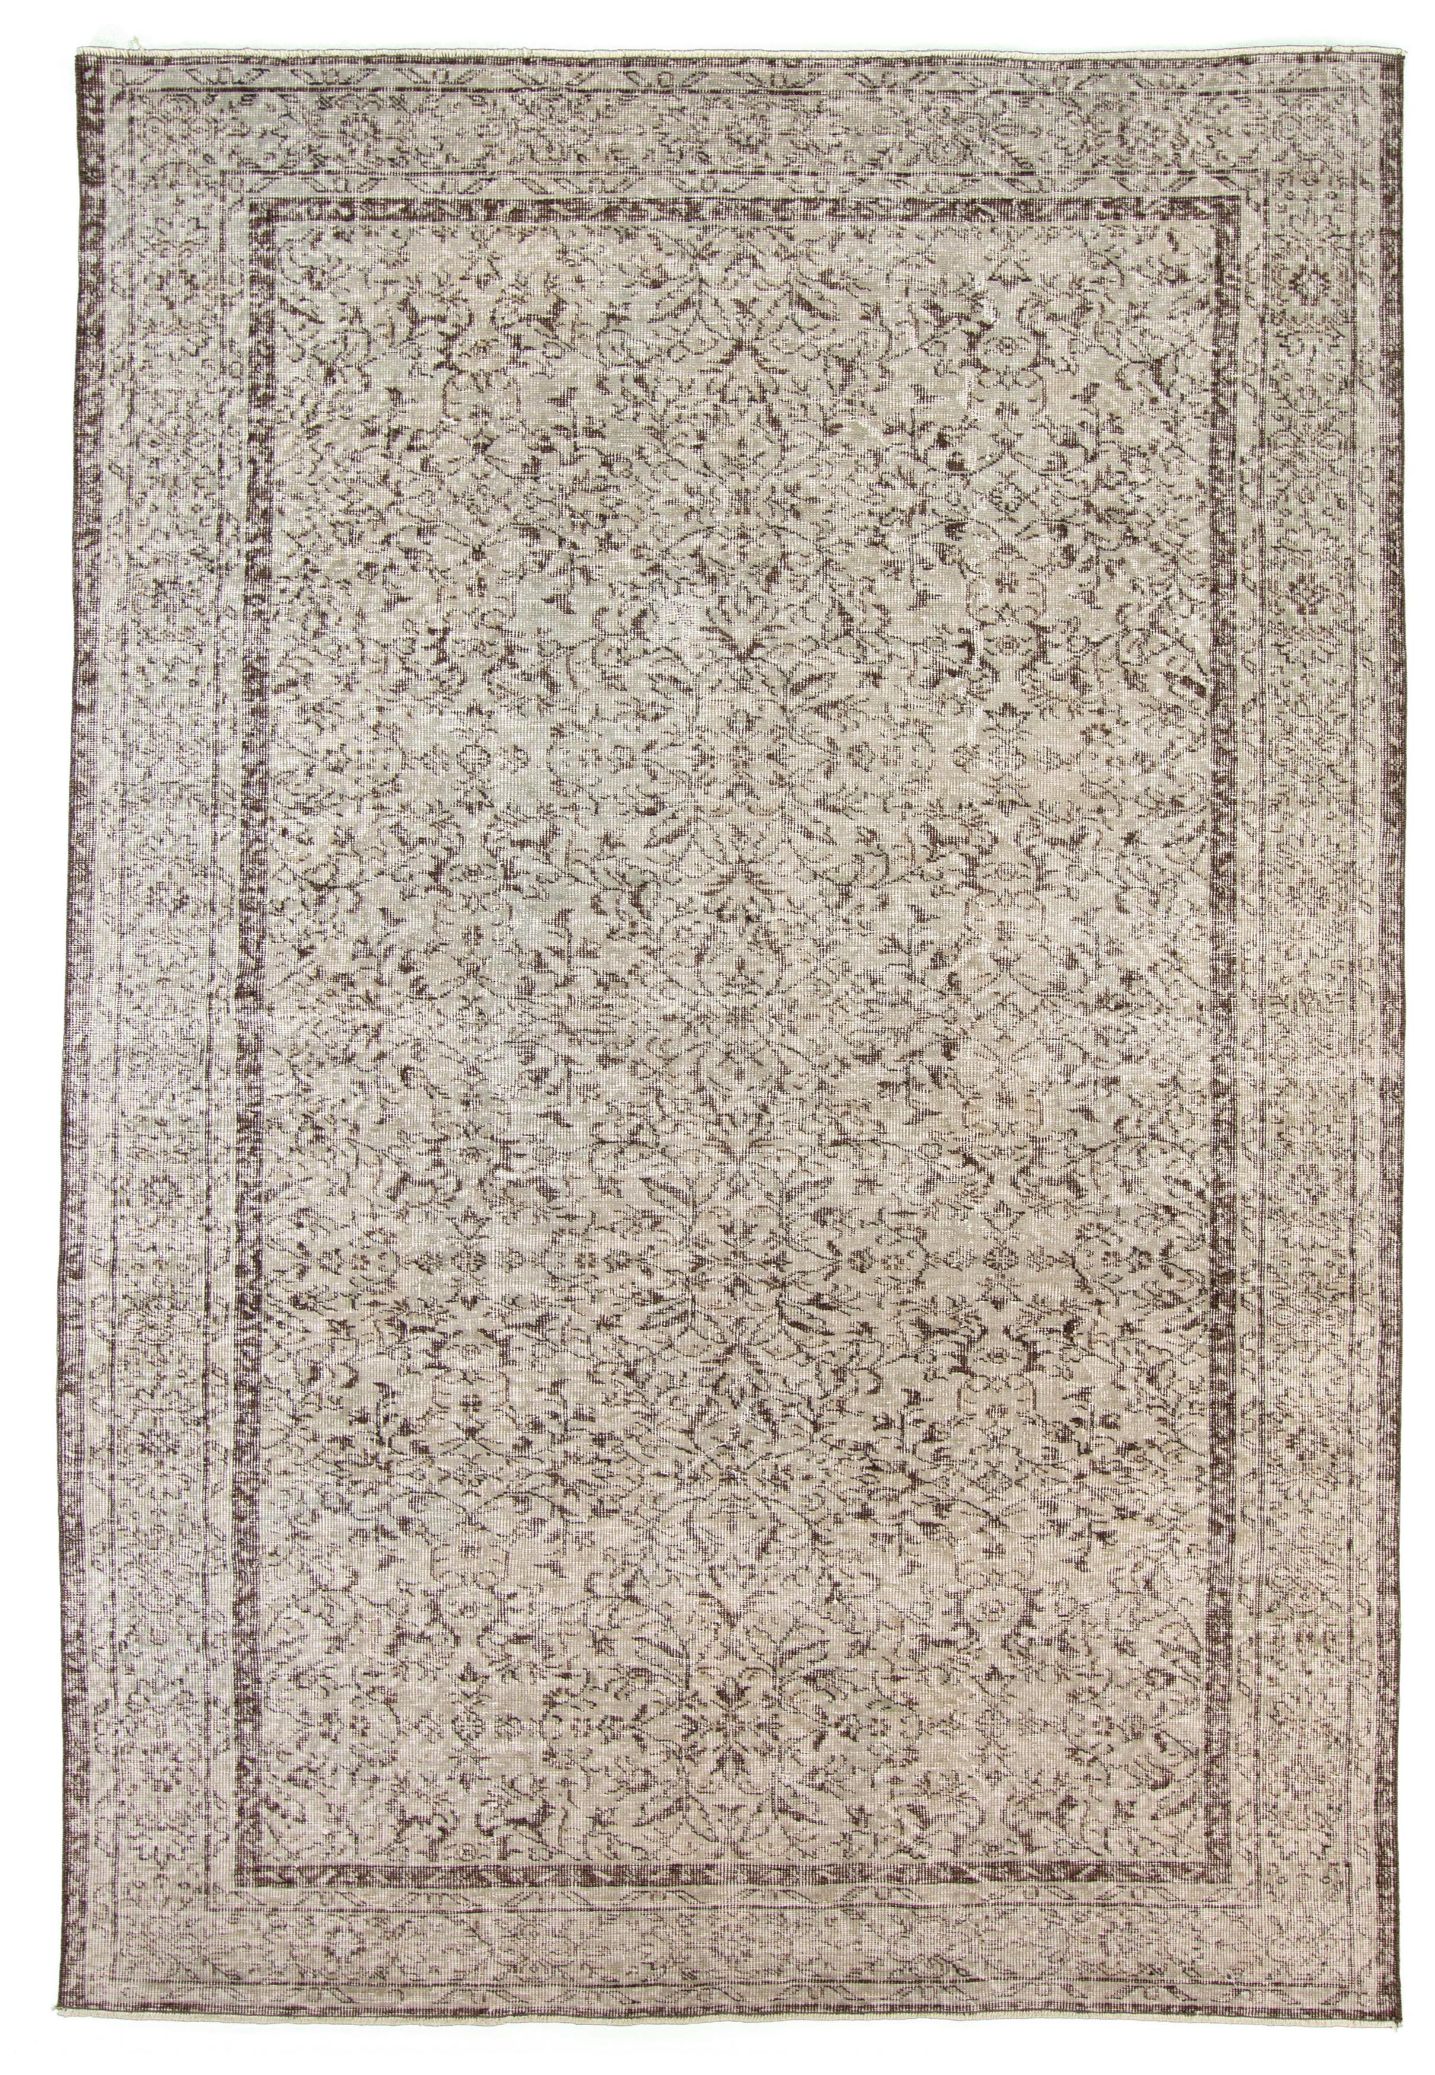 Hand-knotted Antalya Vintage   Rug 10'1" x 6'9" Size: 5'5" x 8'8"  